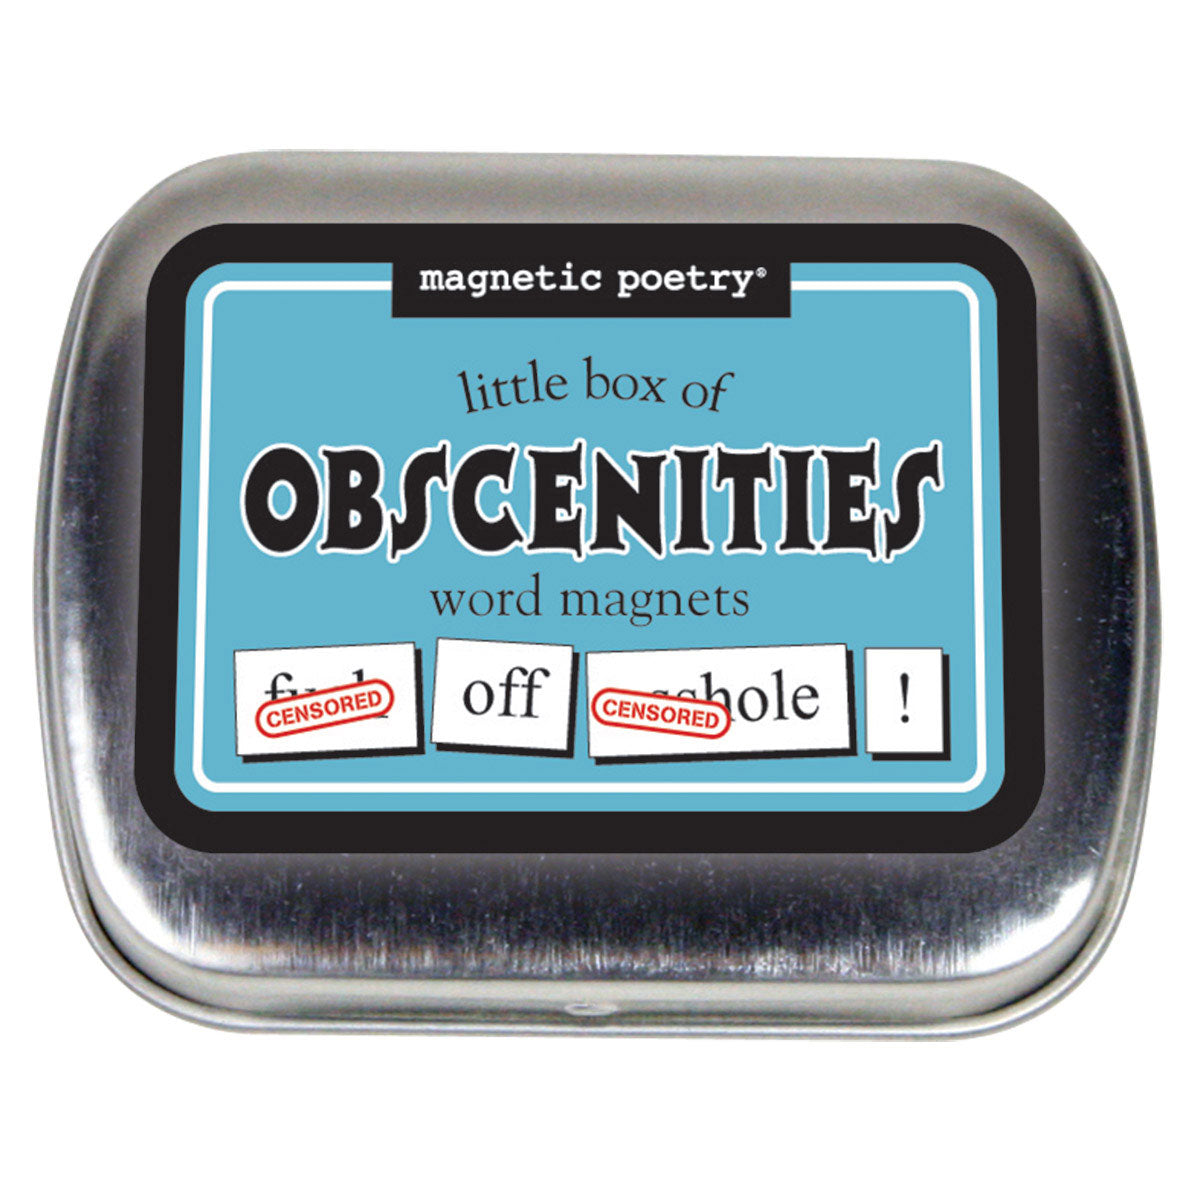 Magnetic Poetry Little Box of Obscenities Word Magnets